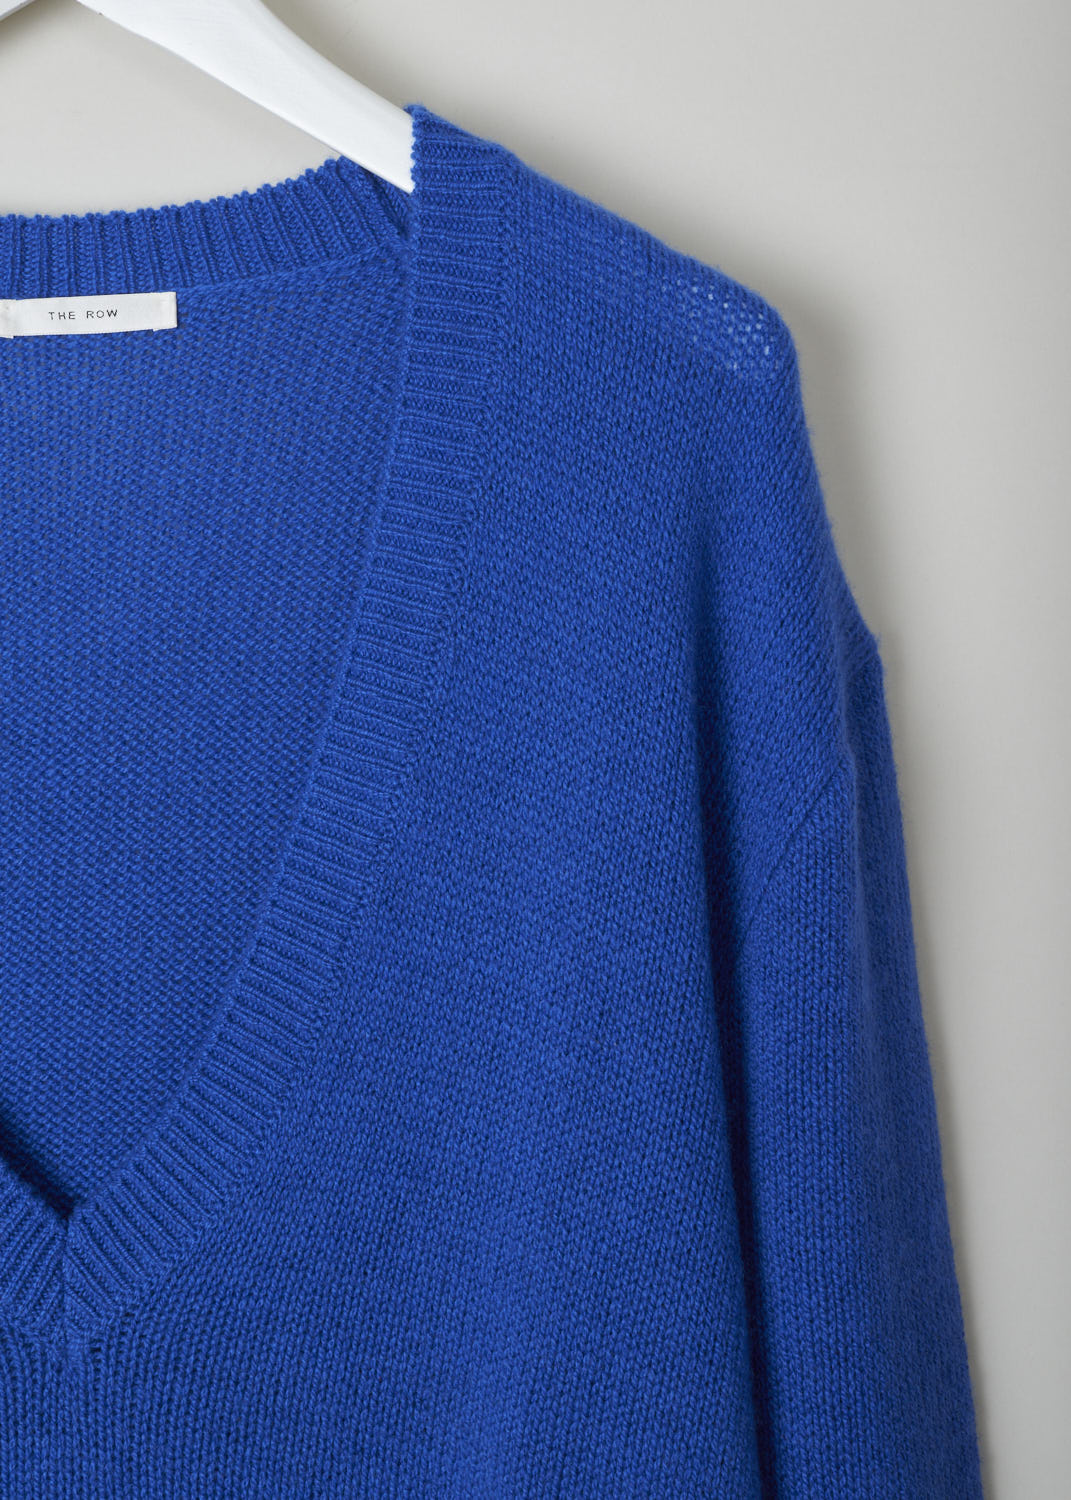 THE ROW, BLUE CASHMERE V-NECKLINE SWEATER, BAUDELIA_TOP_5508YI_87_KLEIN_BLUE, Blue, Detail, This blue V-neck sweater is made from a soft blue cashmere. The cuffs, hem and neckline have a ribbed finish. 
